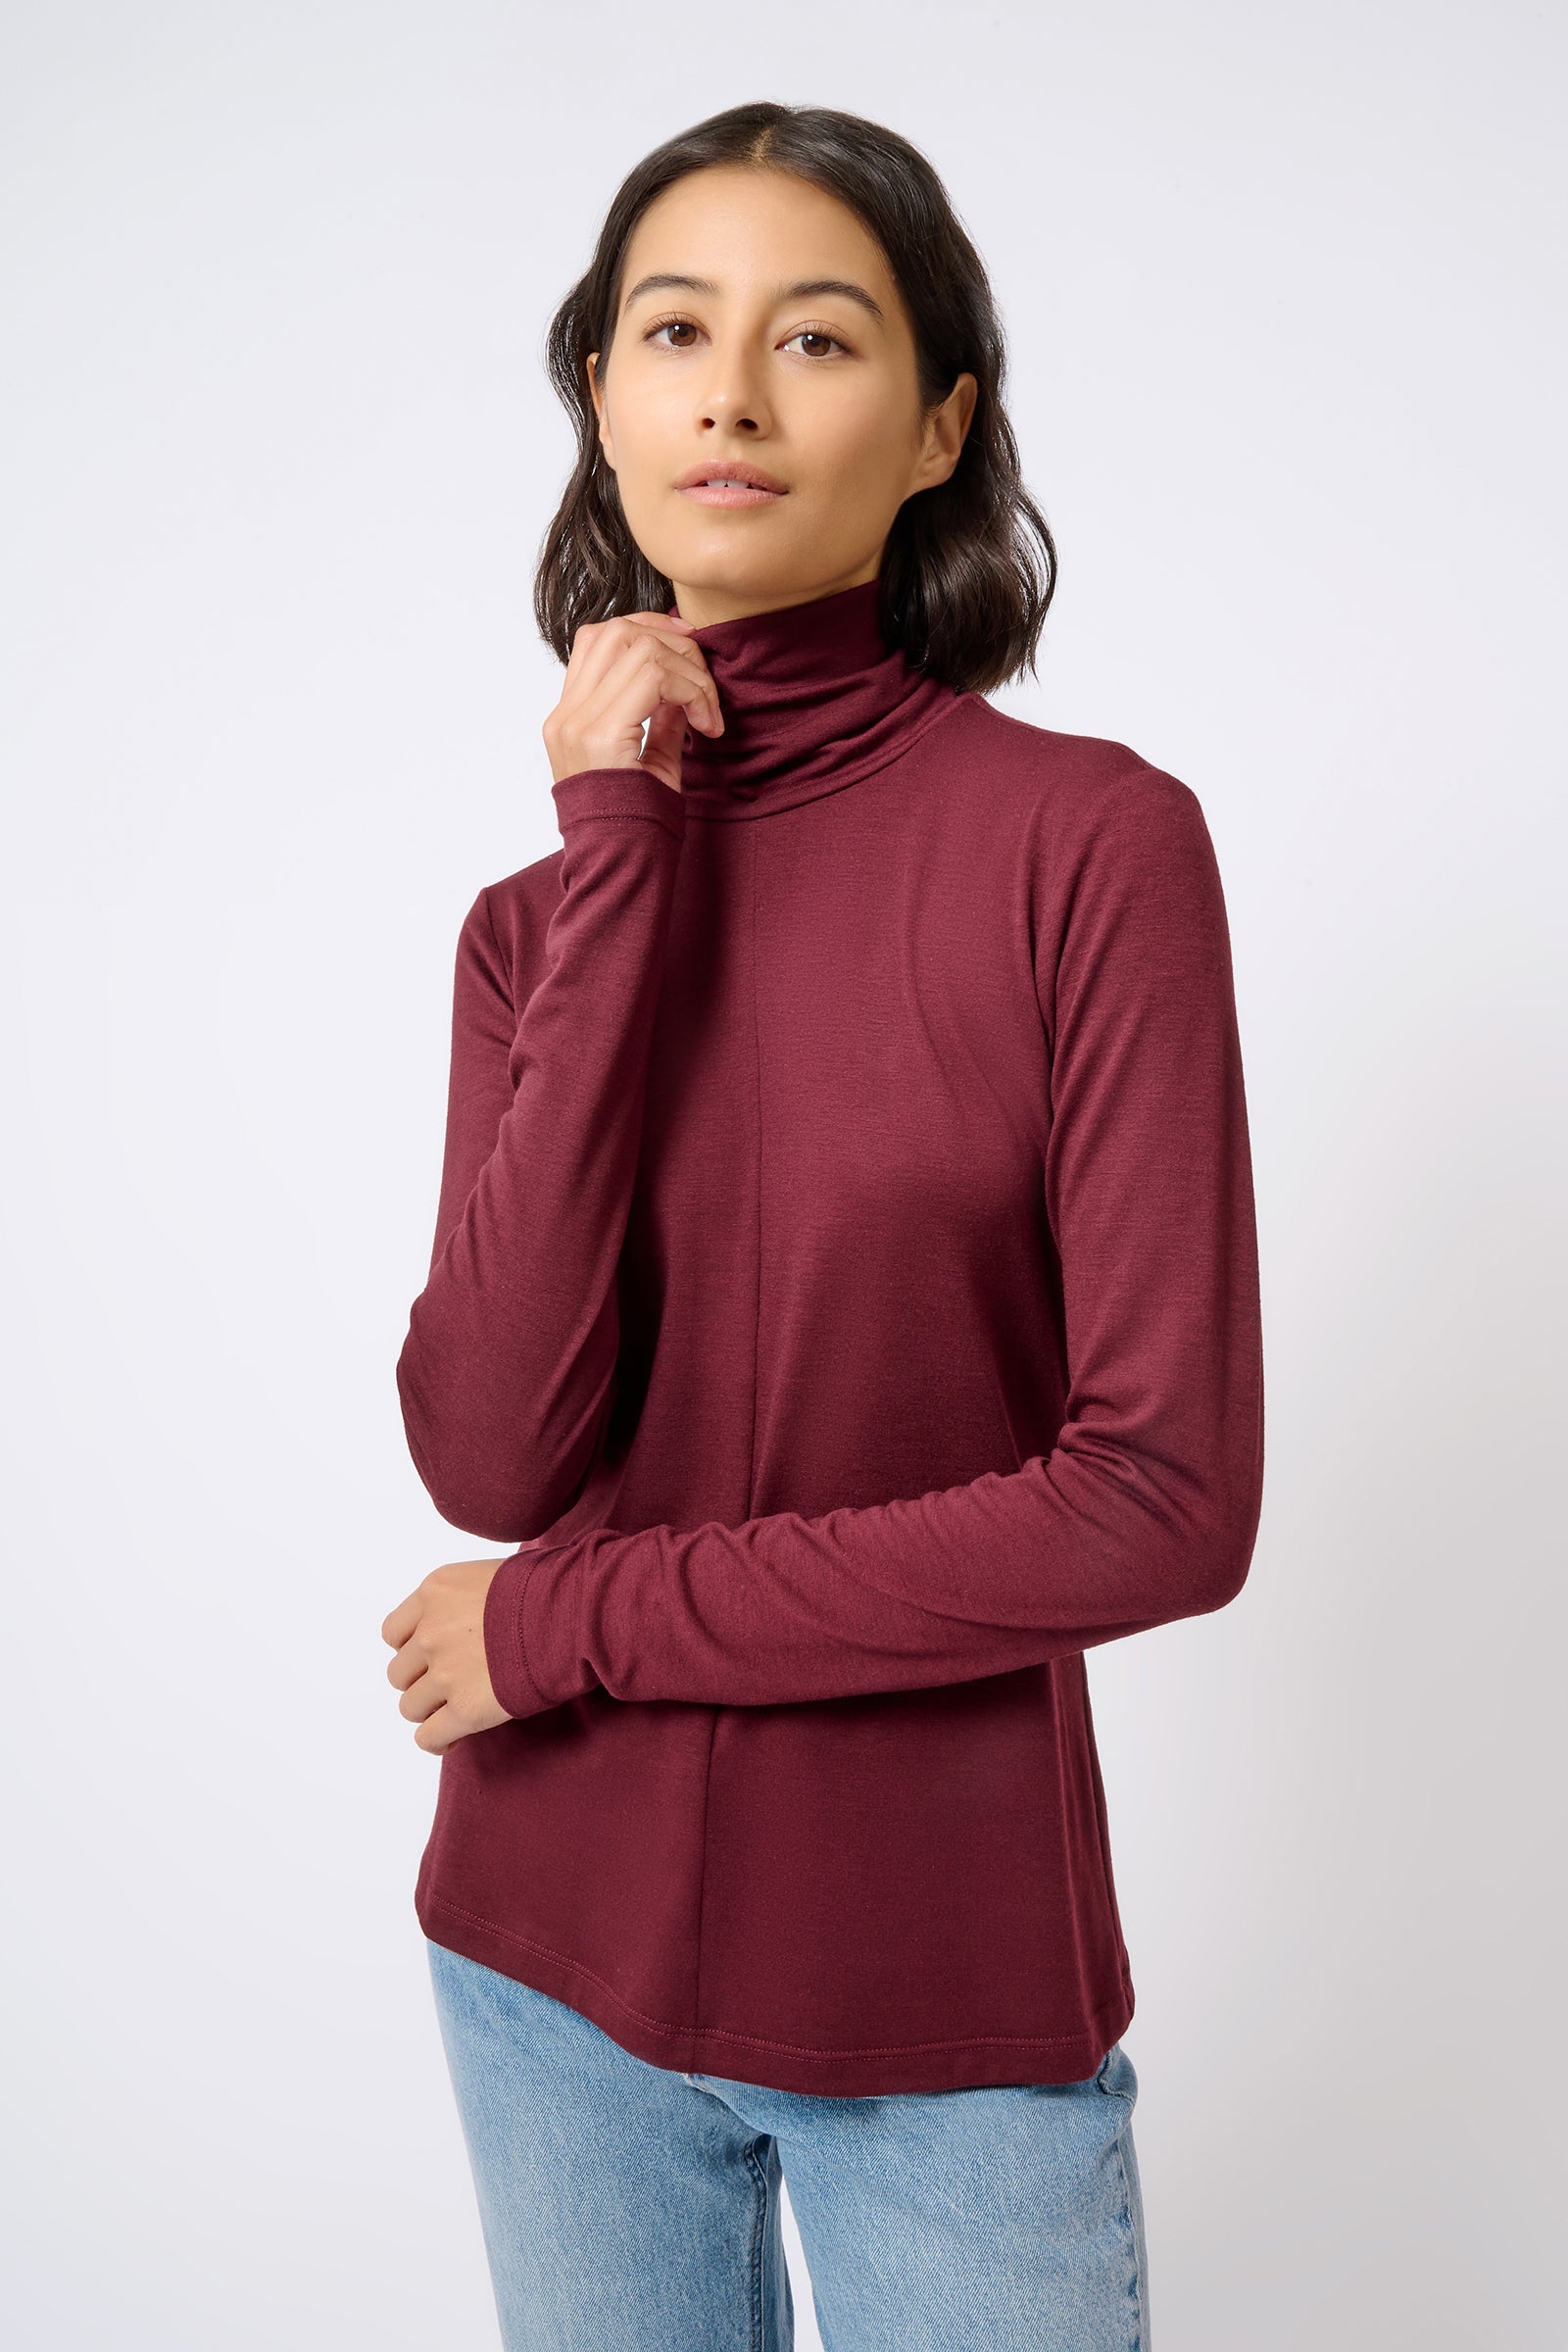 Kal Rieman Seamed Fitted Turtleneck in Wine Color on Model Front Side View